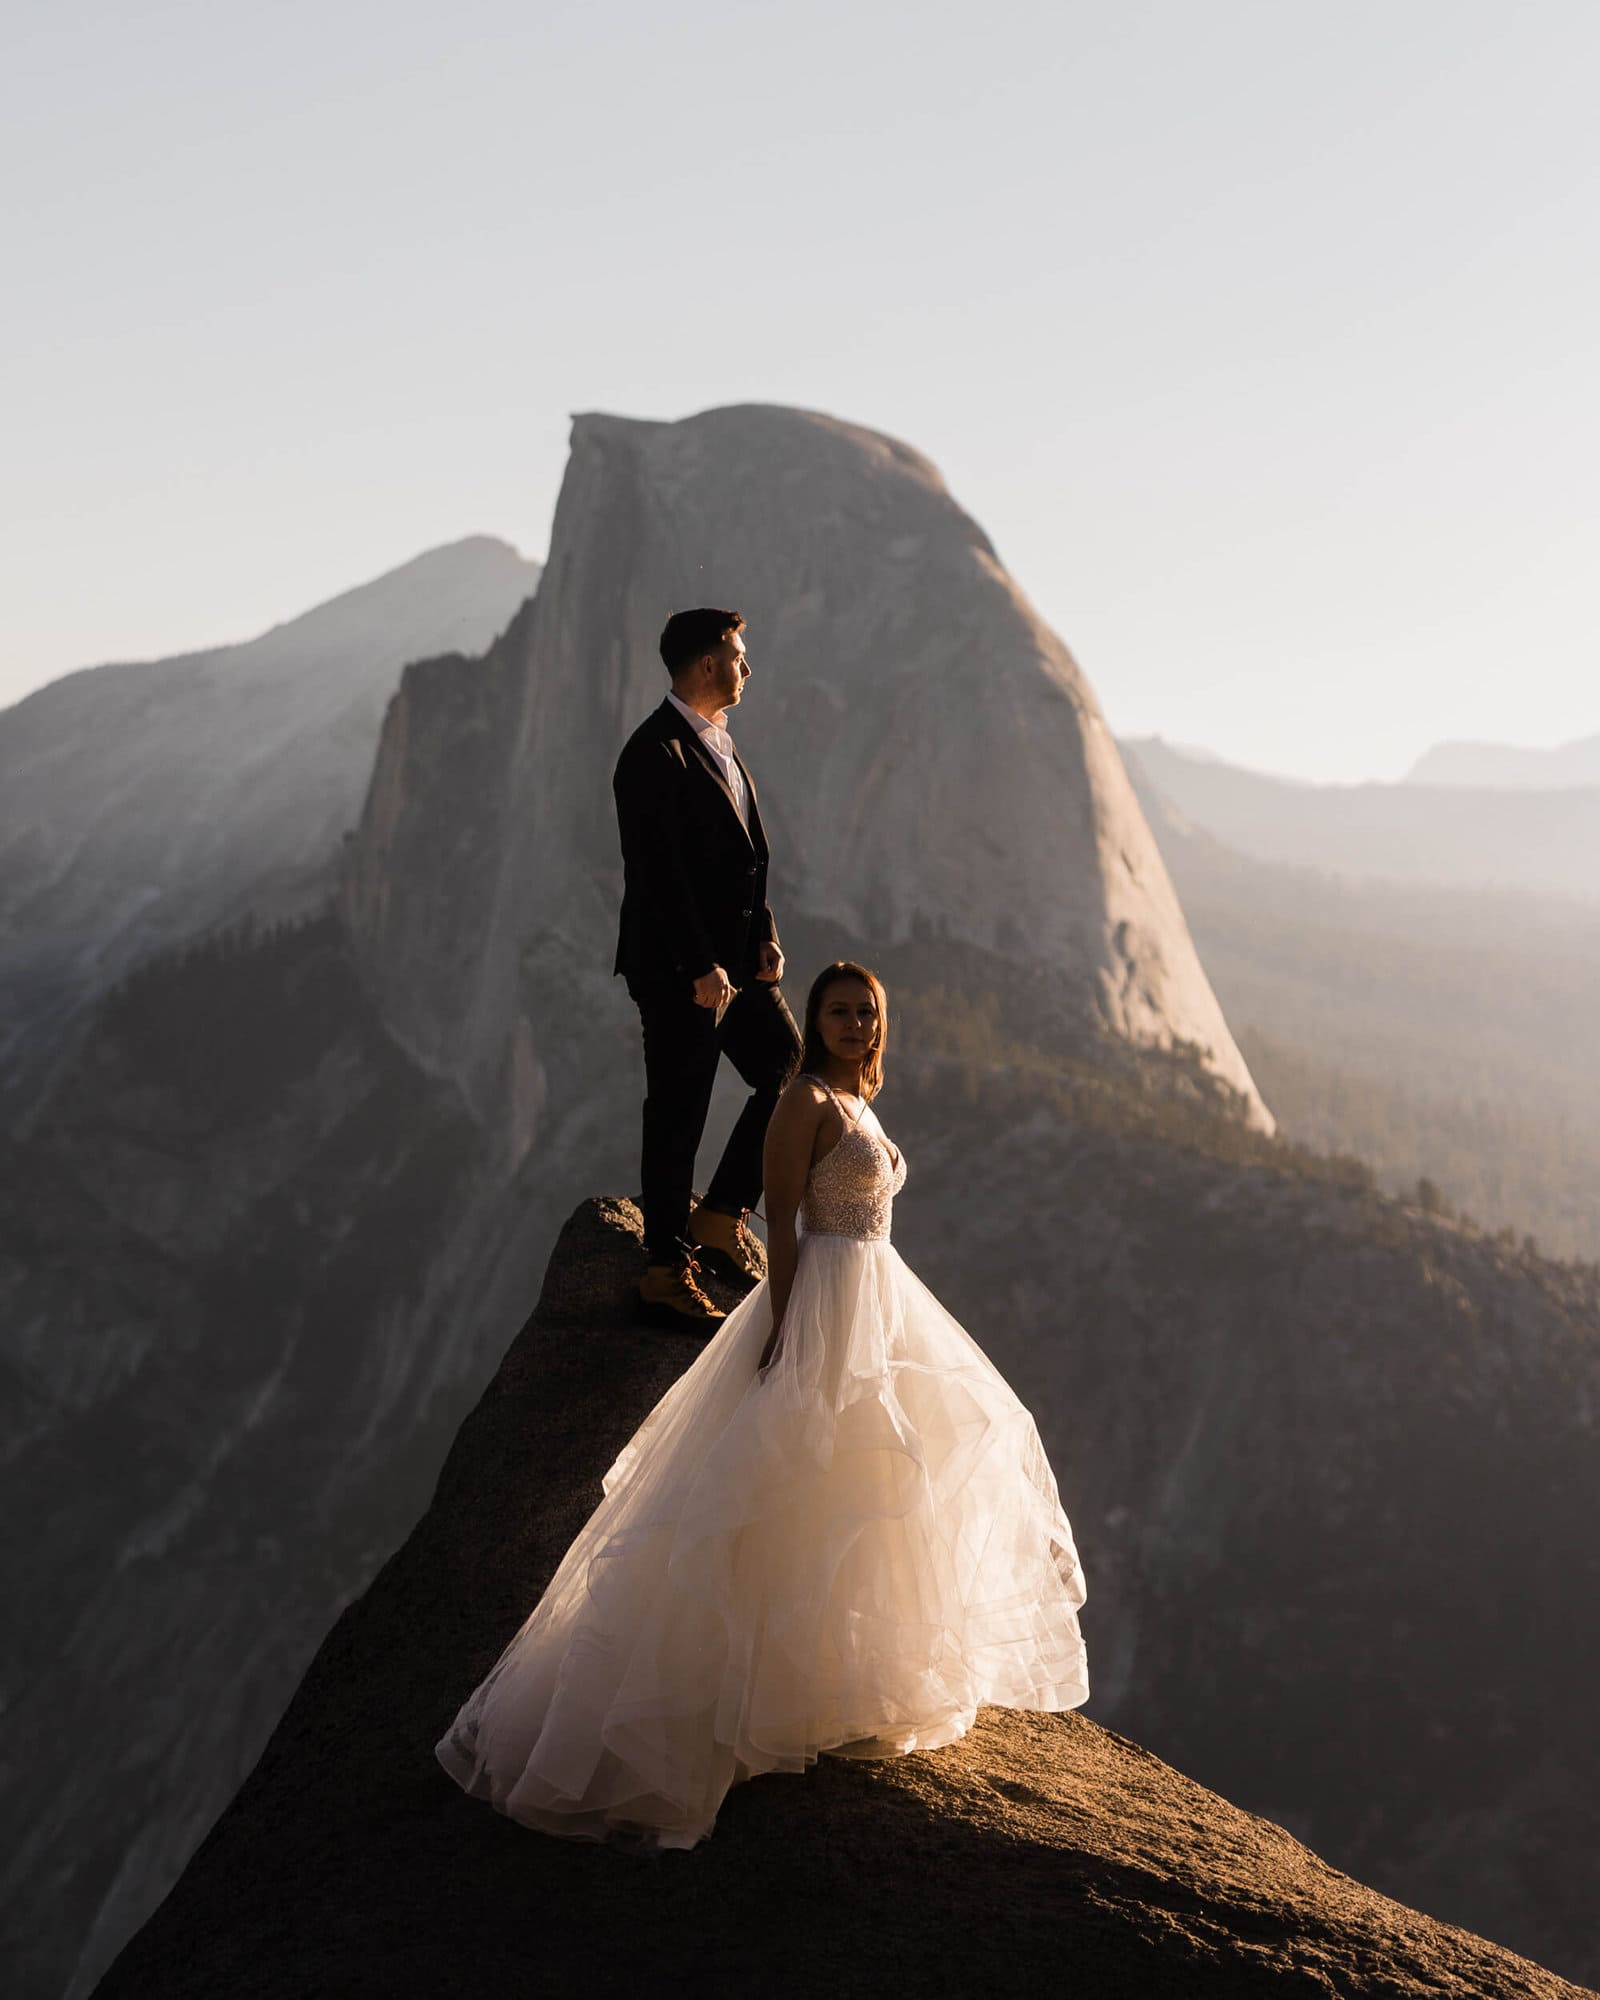 Yosemite is a dream place for an elopement. Check out this Yosemite elopement planning guide for all the info you'll need to plan your elopement adventure.